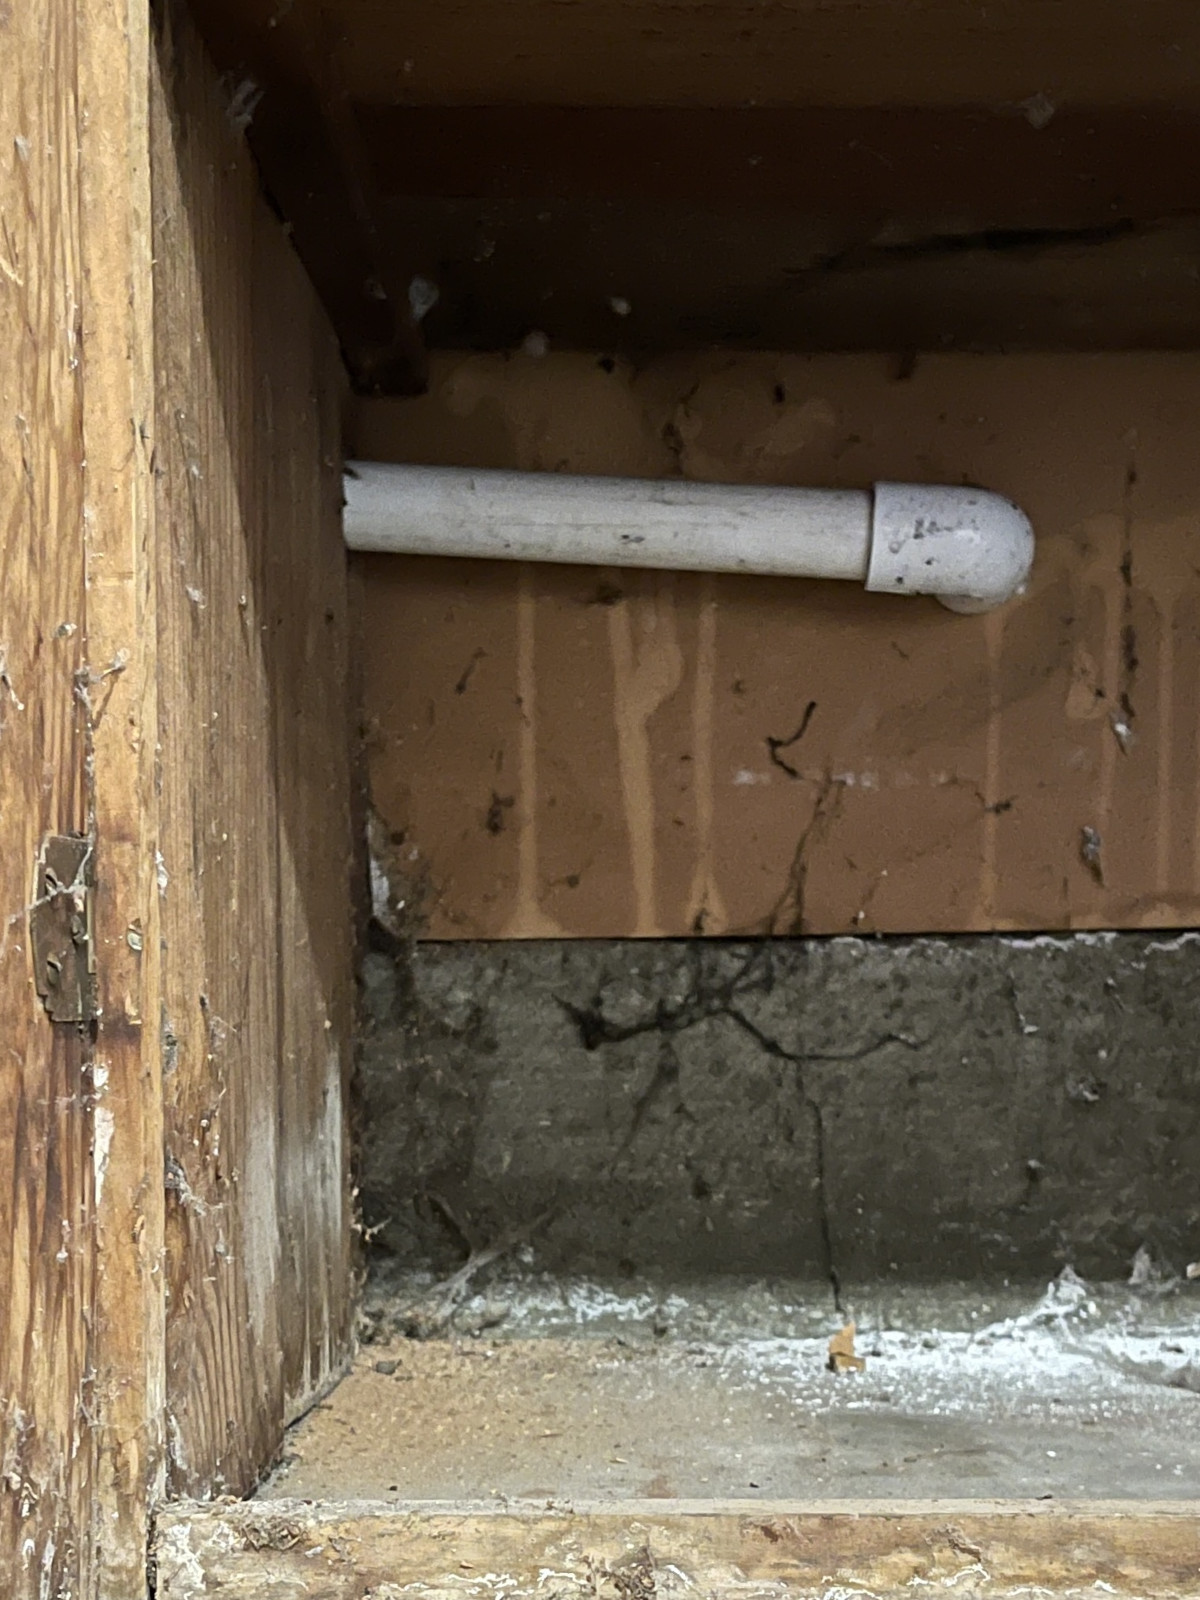 Inside a wooden garage cupboard, a white tube carries greywater outside to the landscape